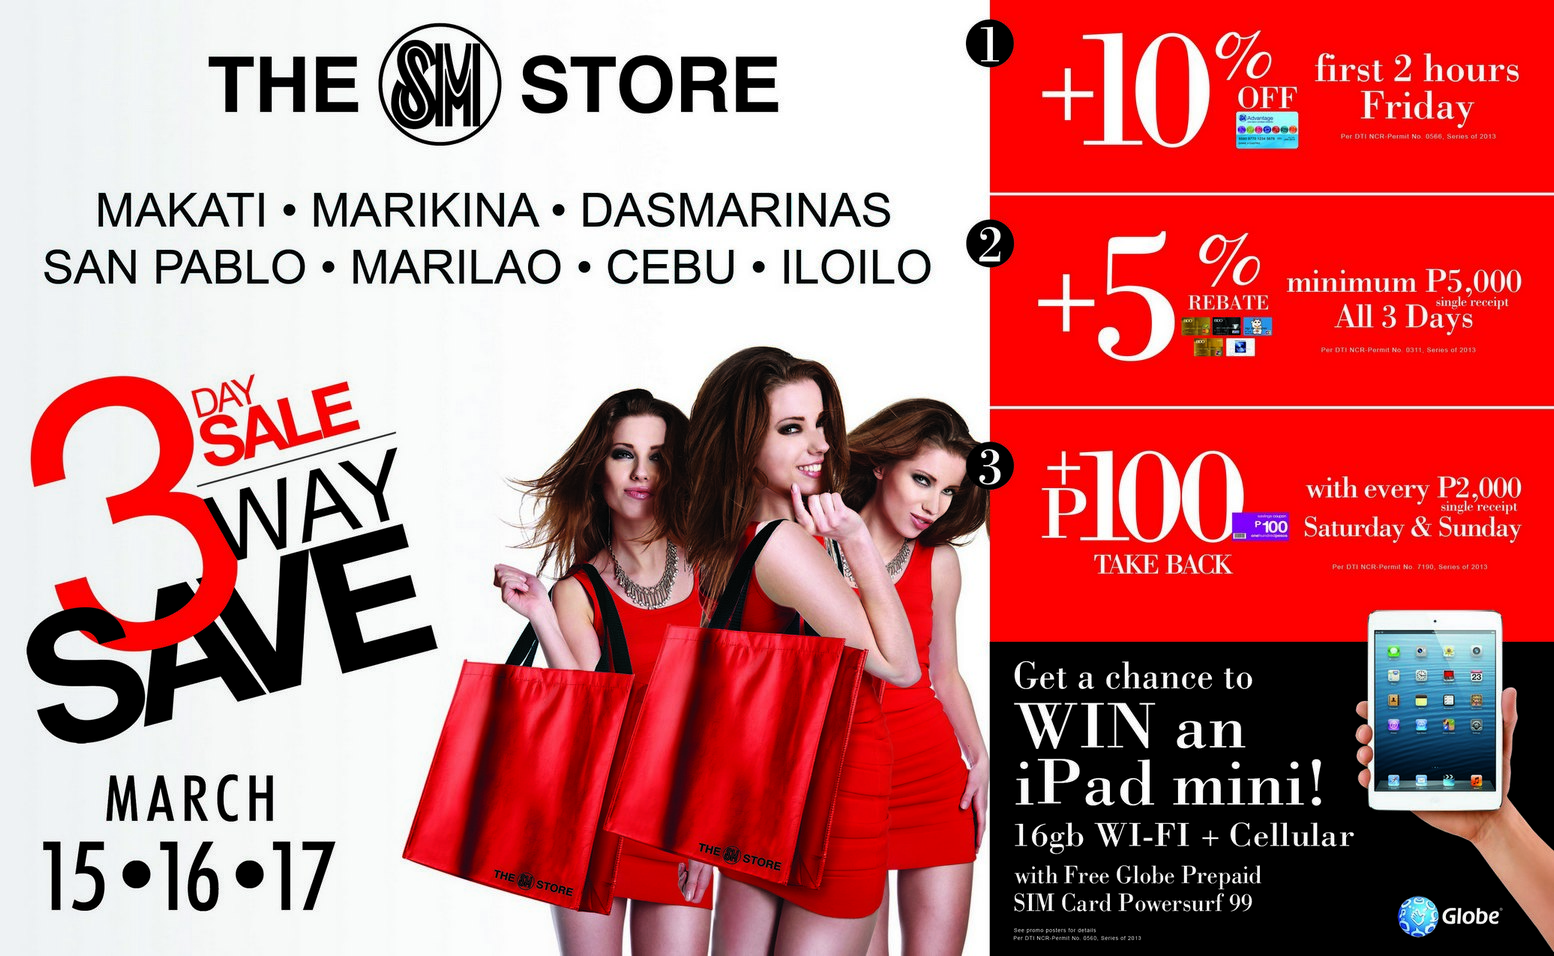 Manila Life The SM store 3day Sale!